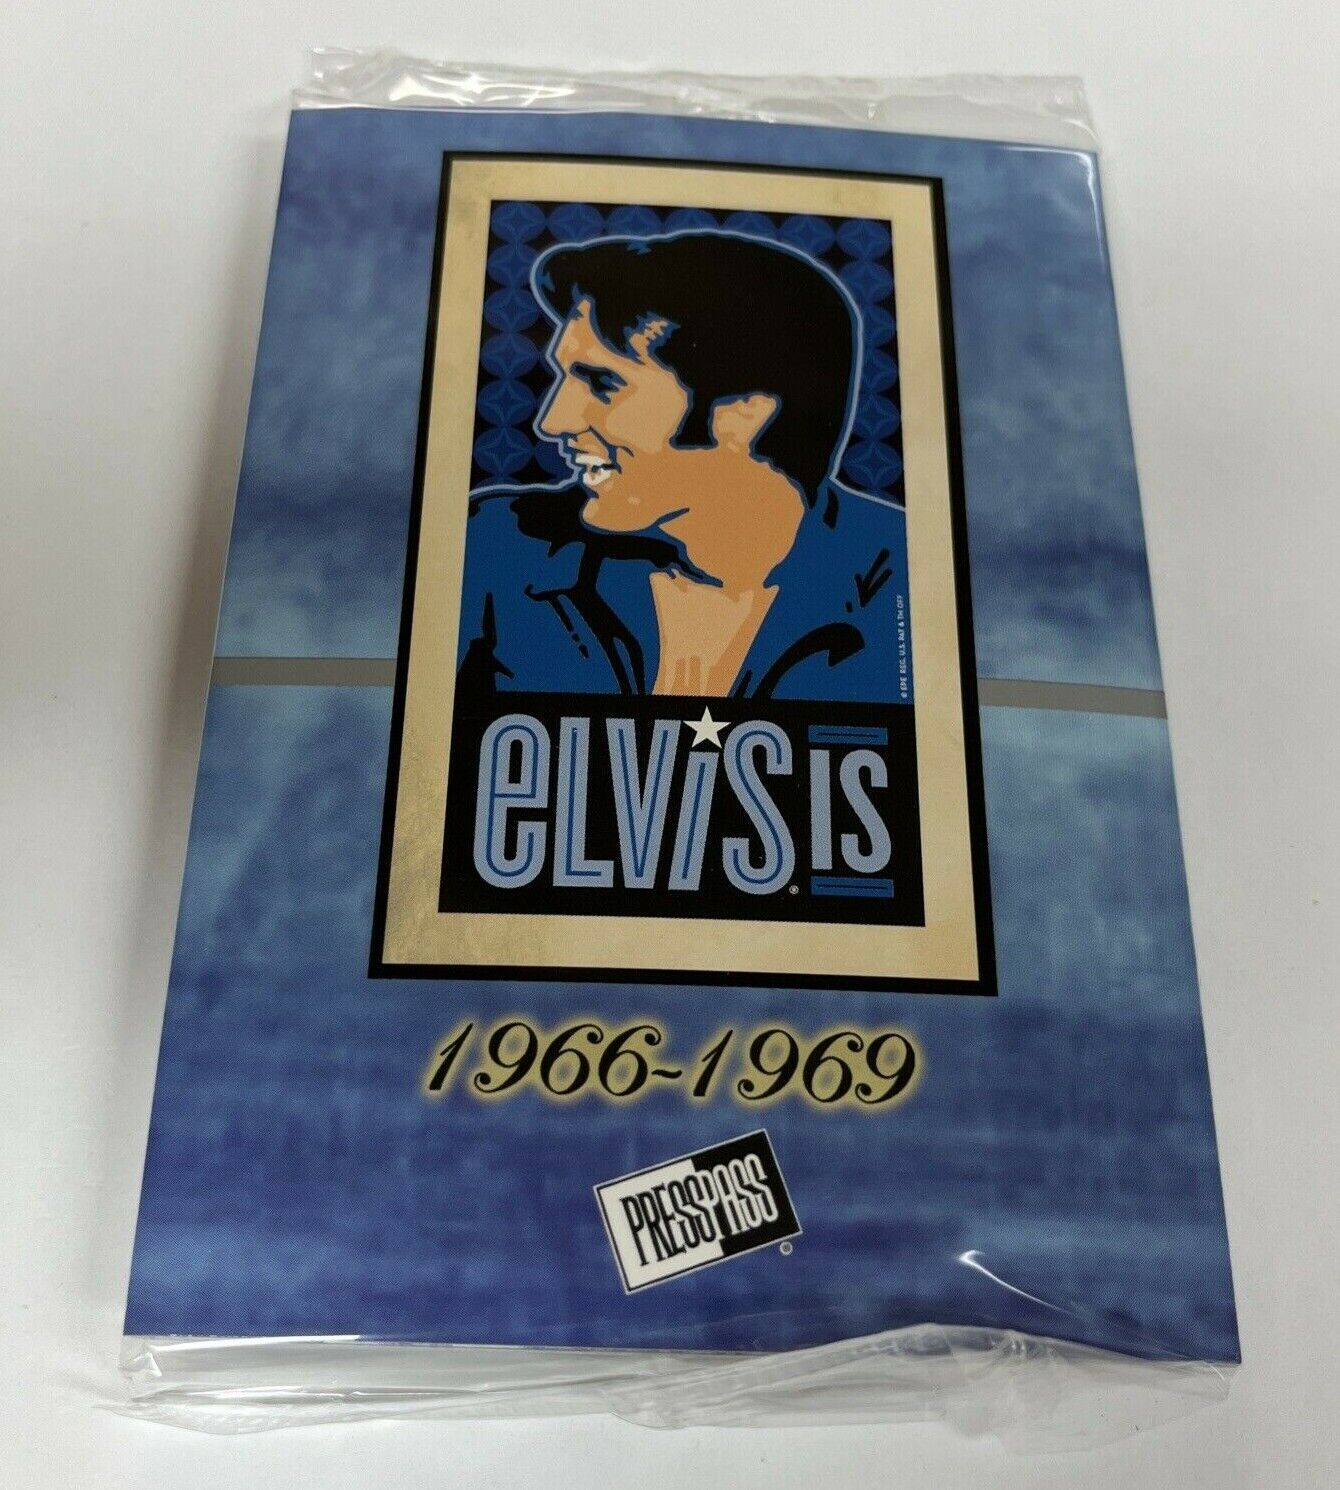 2007 Press Pass Elvis Is Timeline Sealed Fold-Out Jumbo Card (1966-1969)